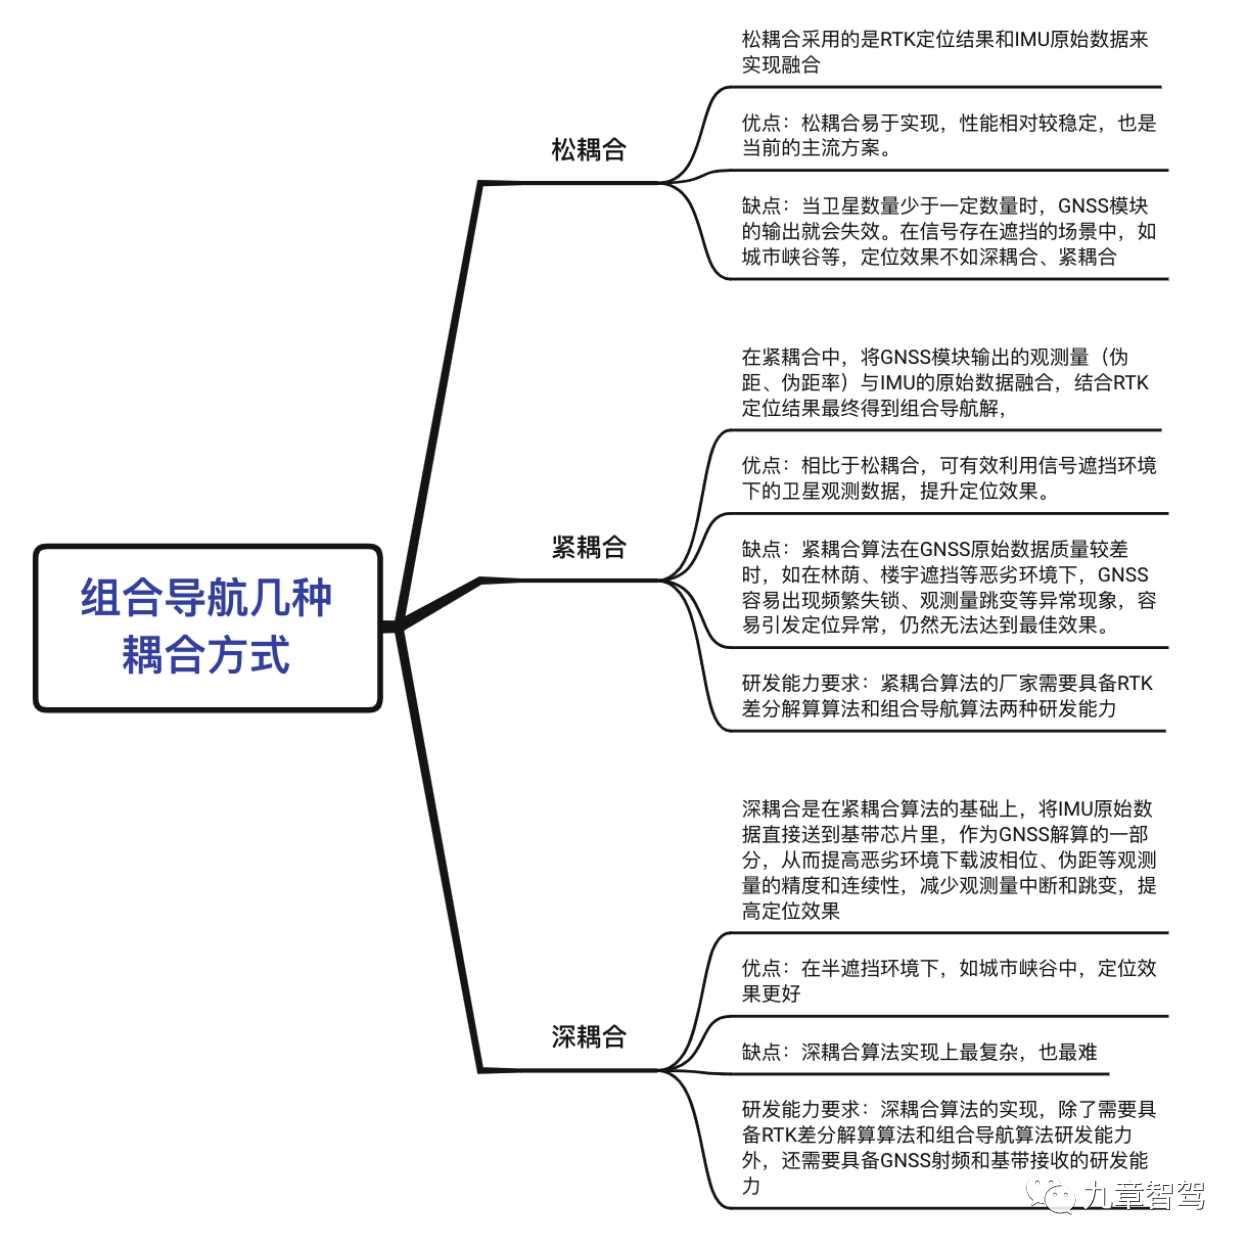 △ Several Coupling Methods of Combined Navigation
Information Source: Jiuzhang Intelligent Driving organizes public information and expert interview information